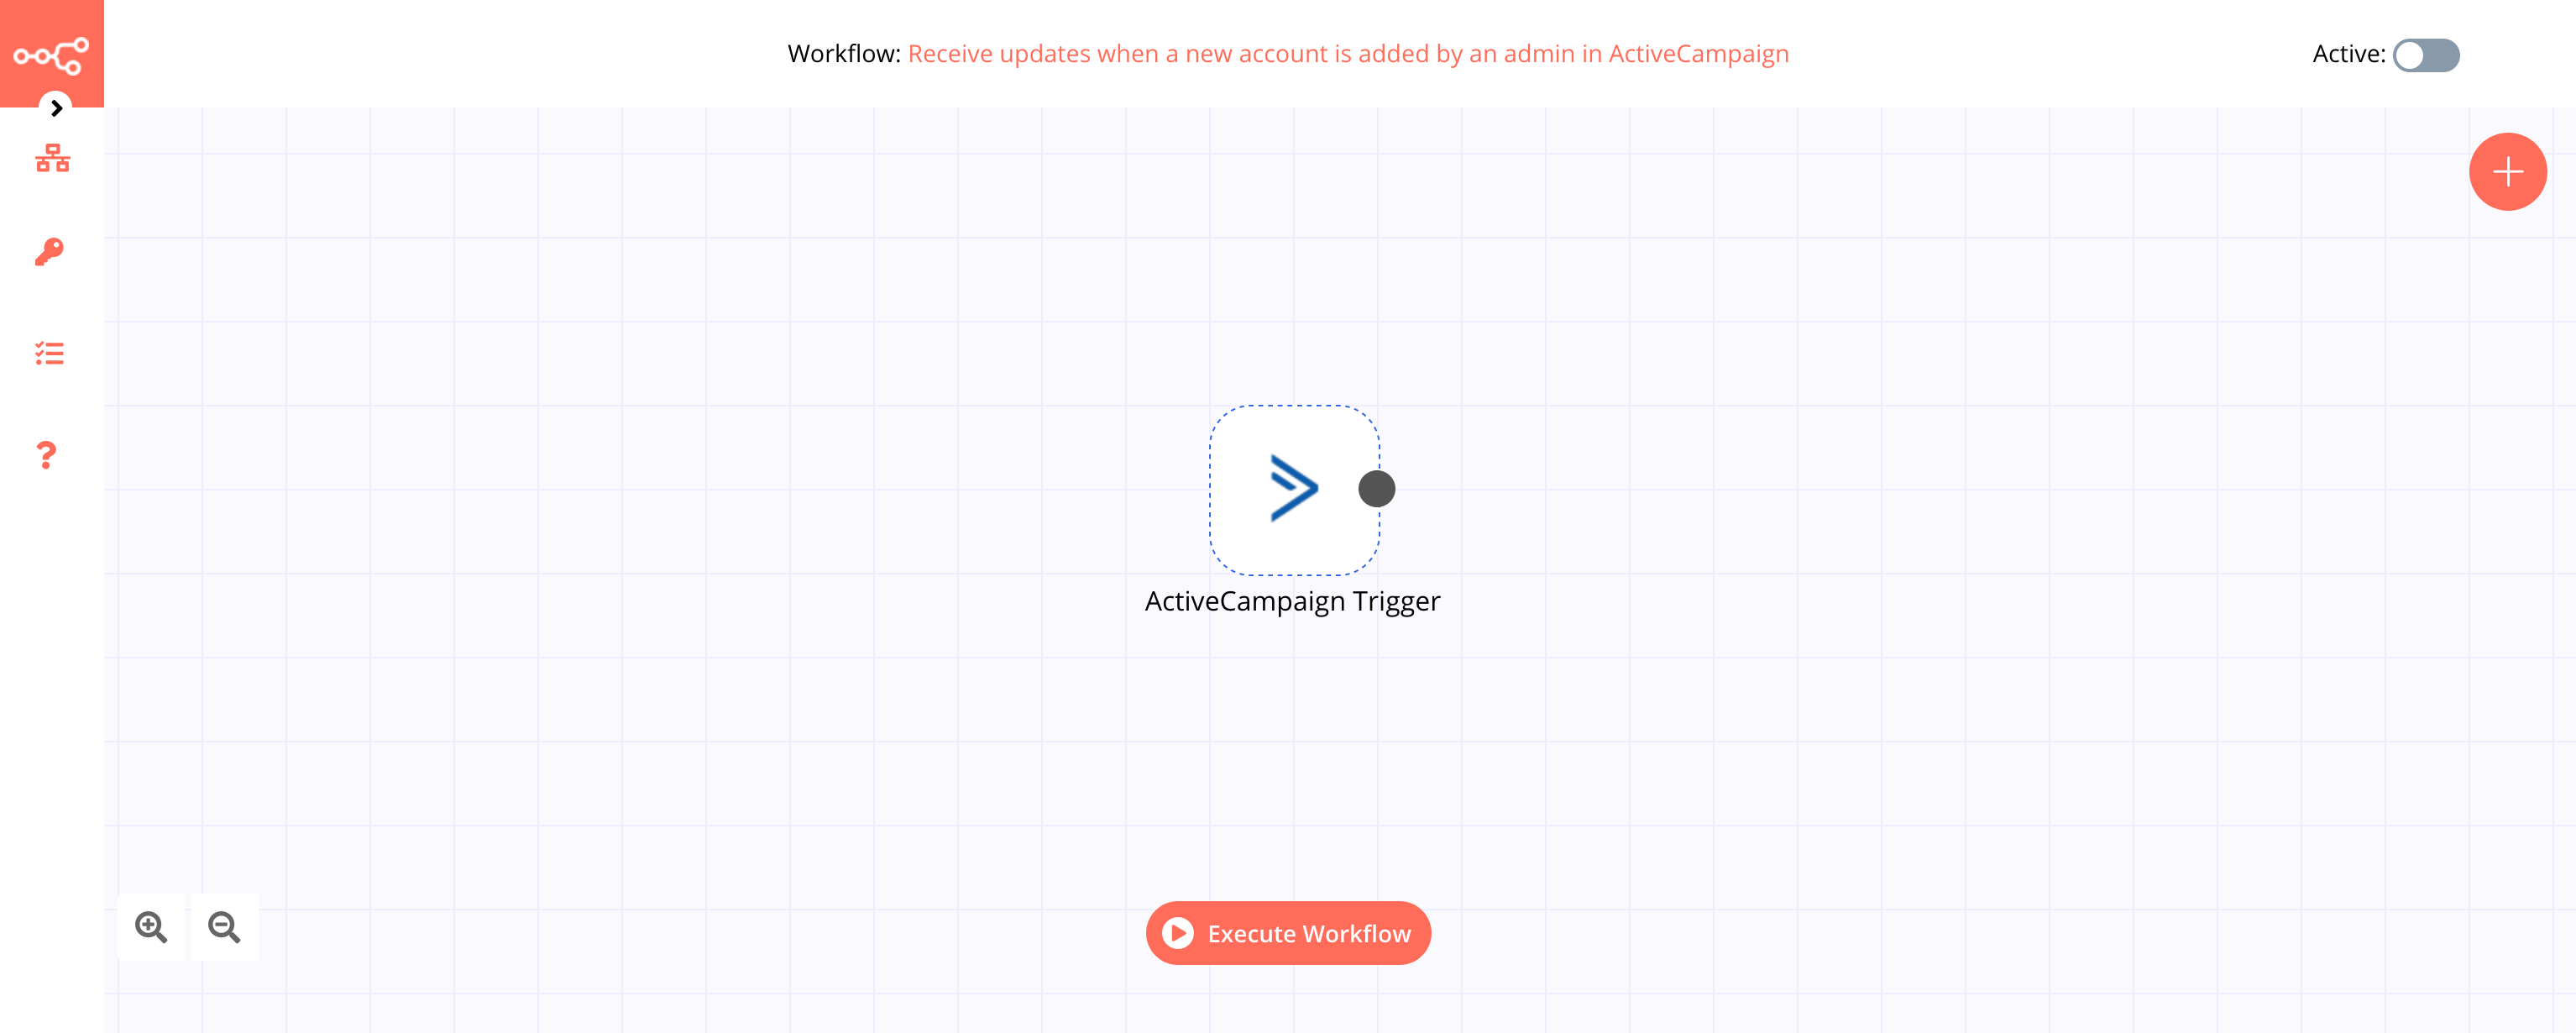 A workflow with the ActiveCampaign Trigger node